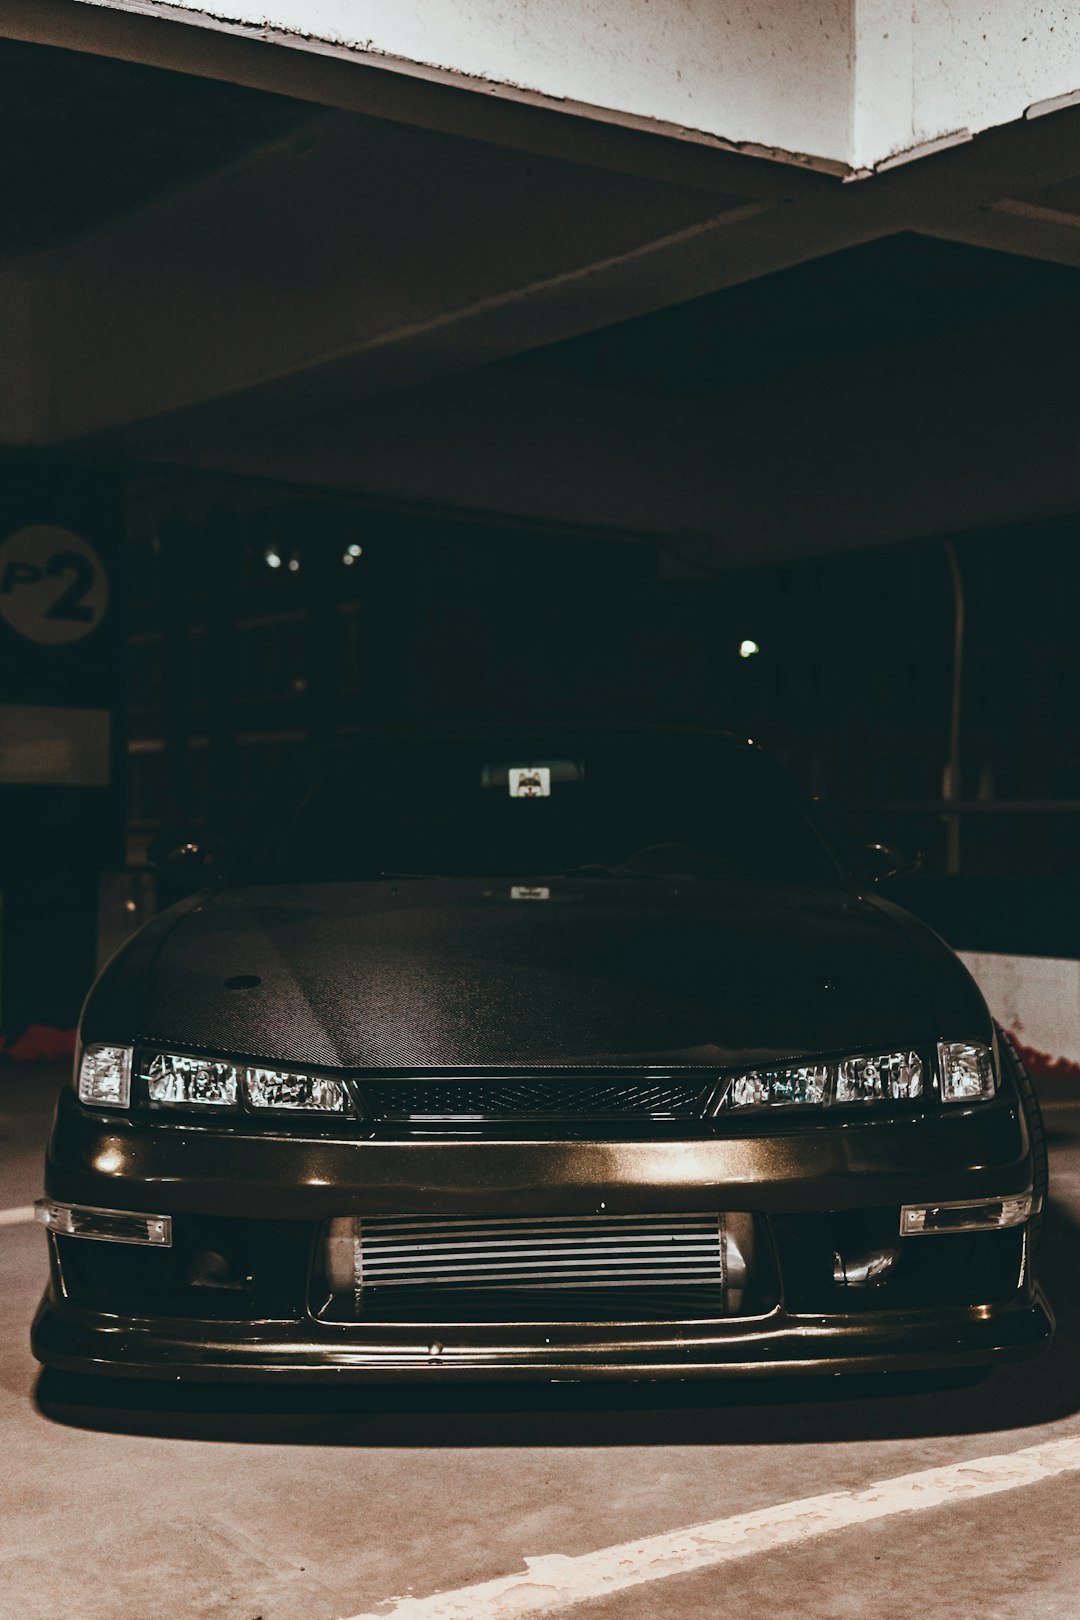 Front end of a JDM Nissan s14
insta: @sichpicsss